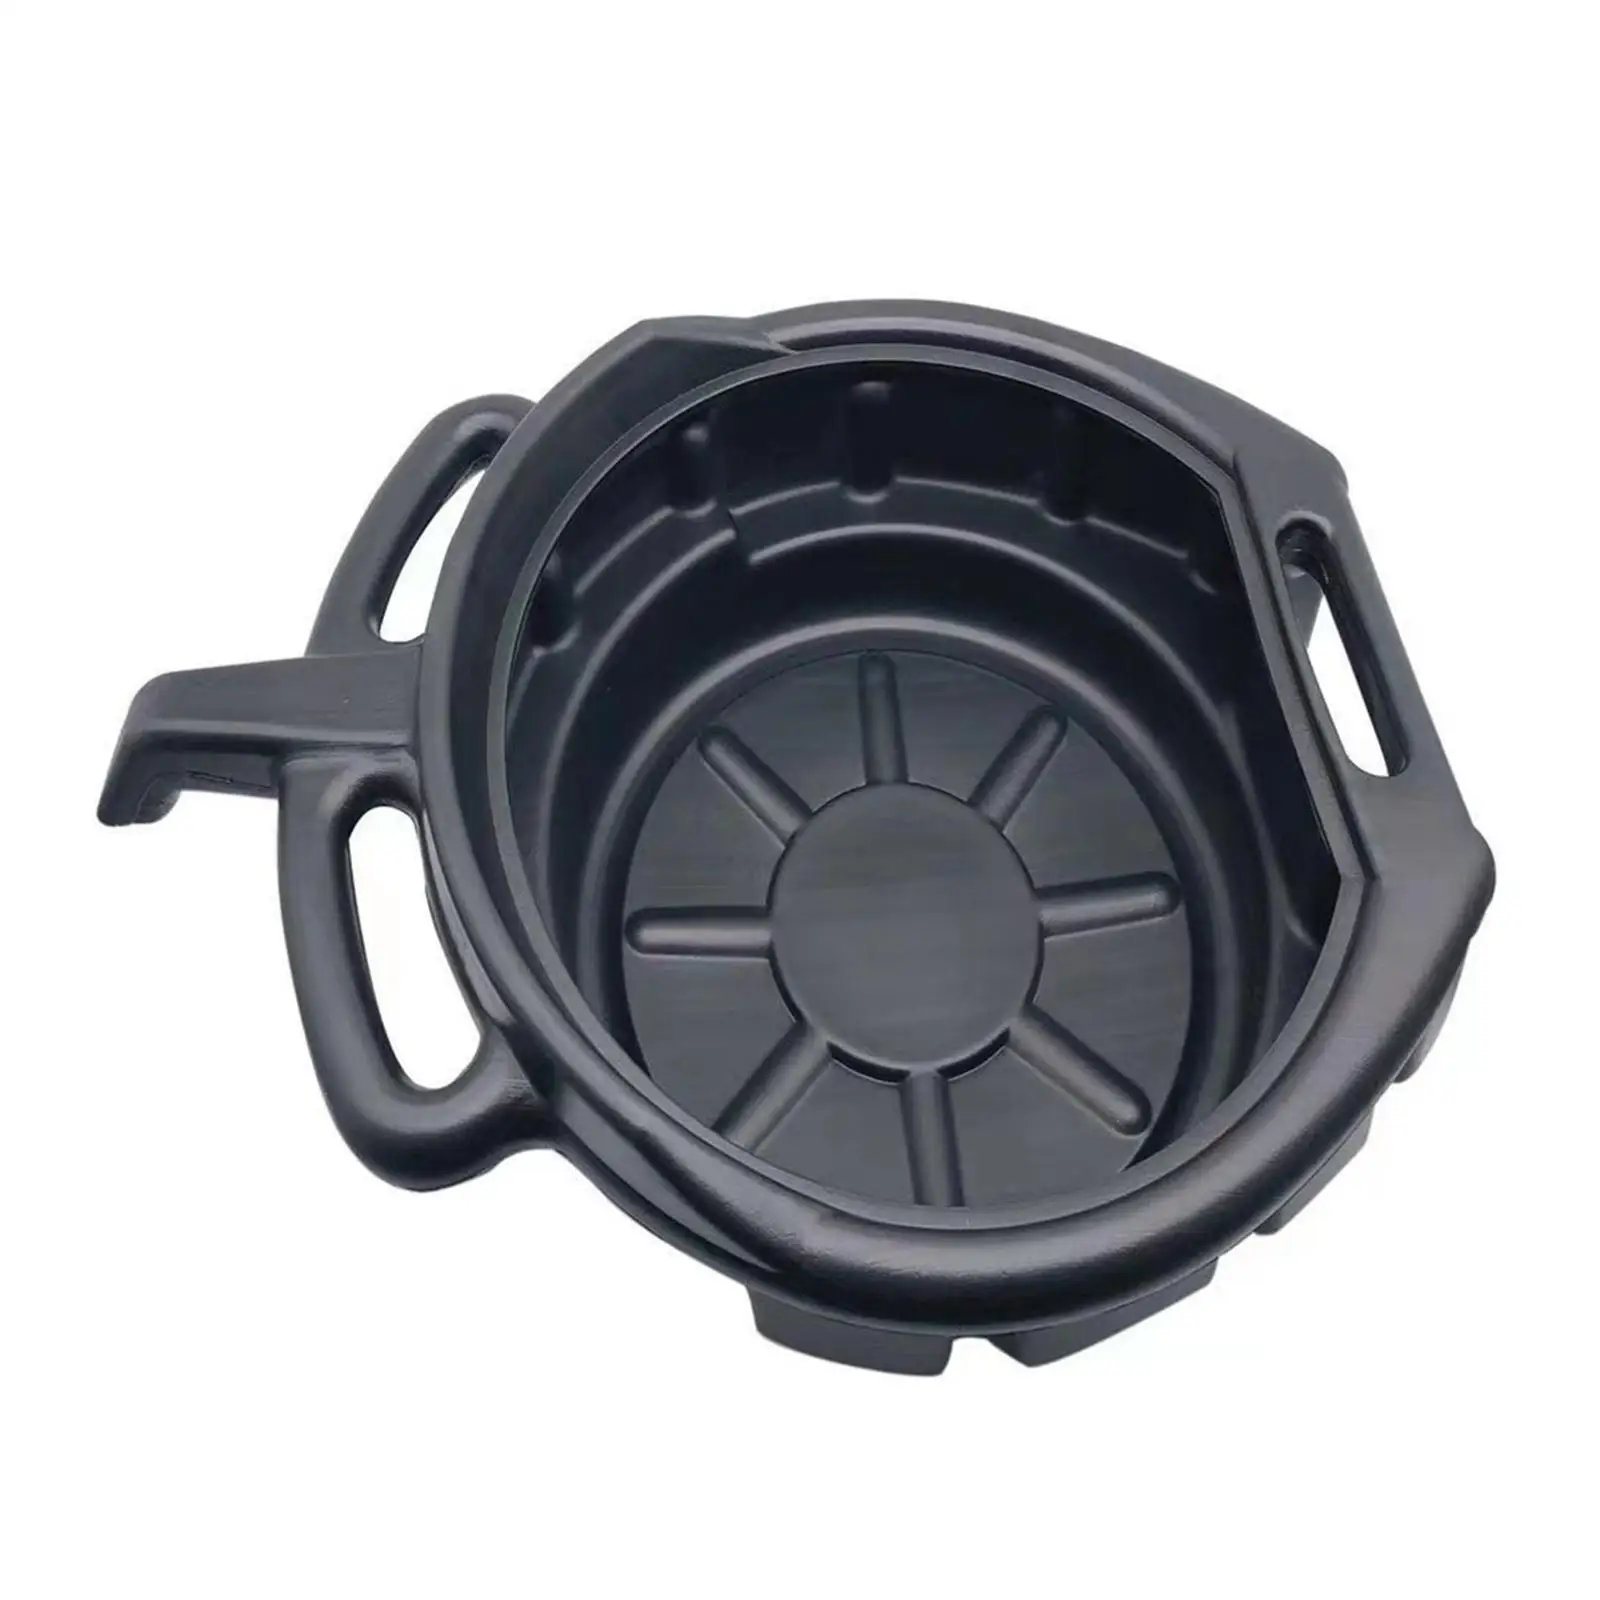 Oil Drain Container Can Portable Storage Car Accesories Drain Pan for Vehicle Car Fuel Fluid Boat Truck Garage Tool